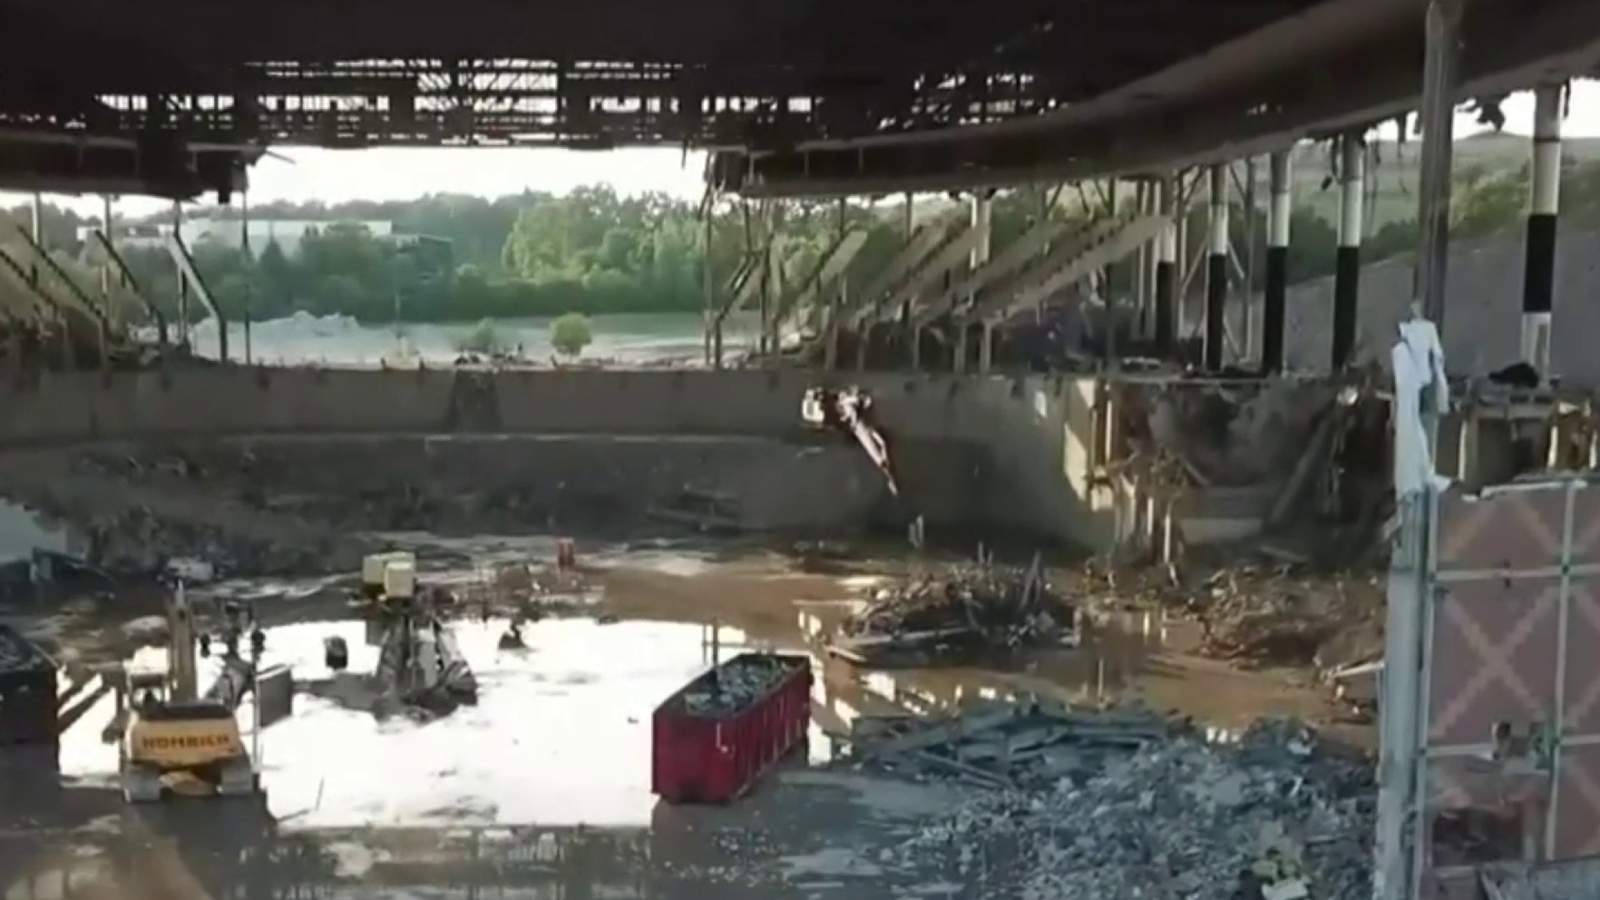 VIDEO: Whats left of the Palace of Auburn Hills